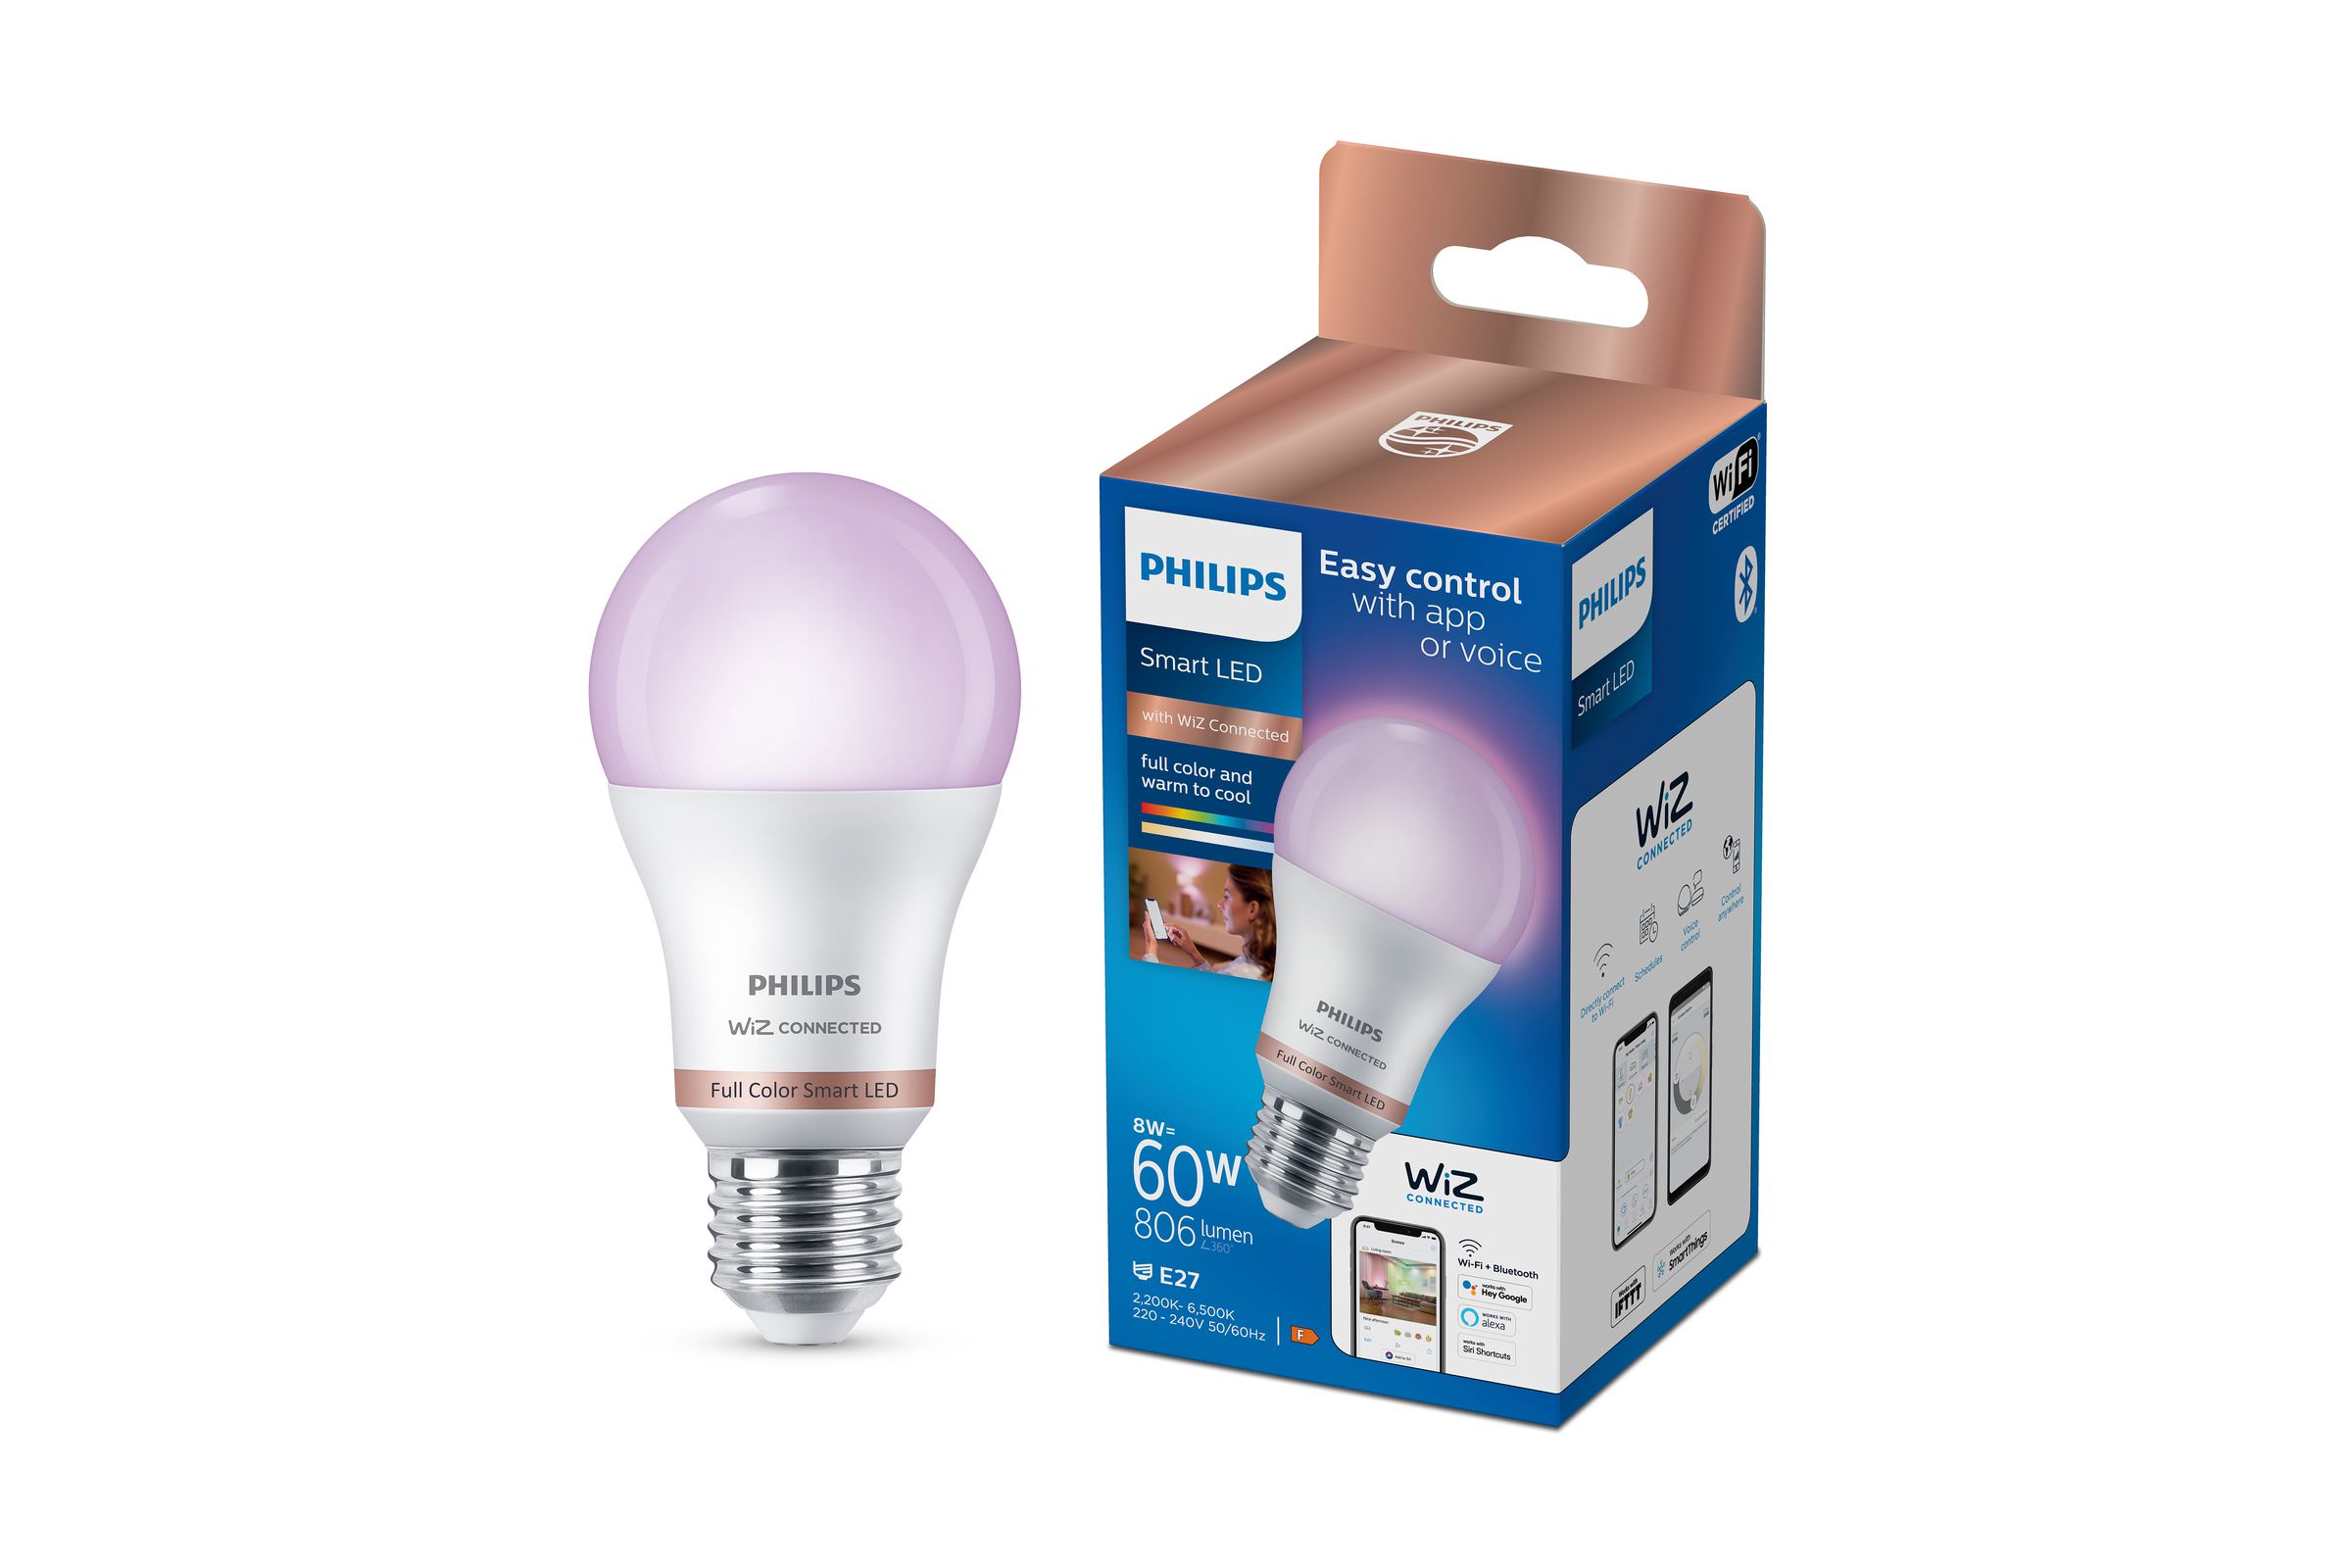 Like Philips Hue, the new Philips Smart LED bulbs support millions of colors.